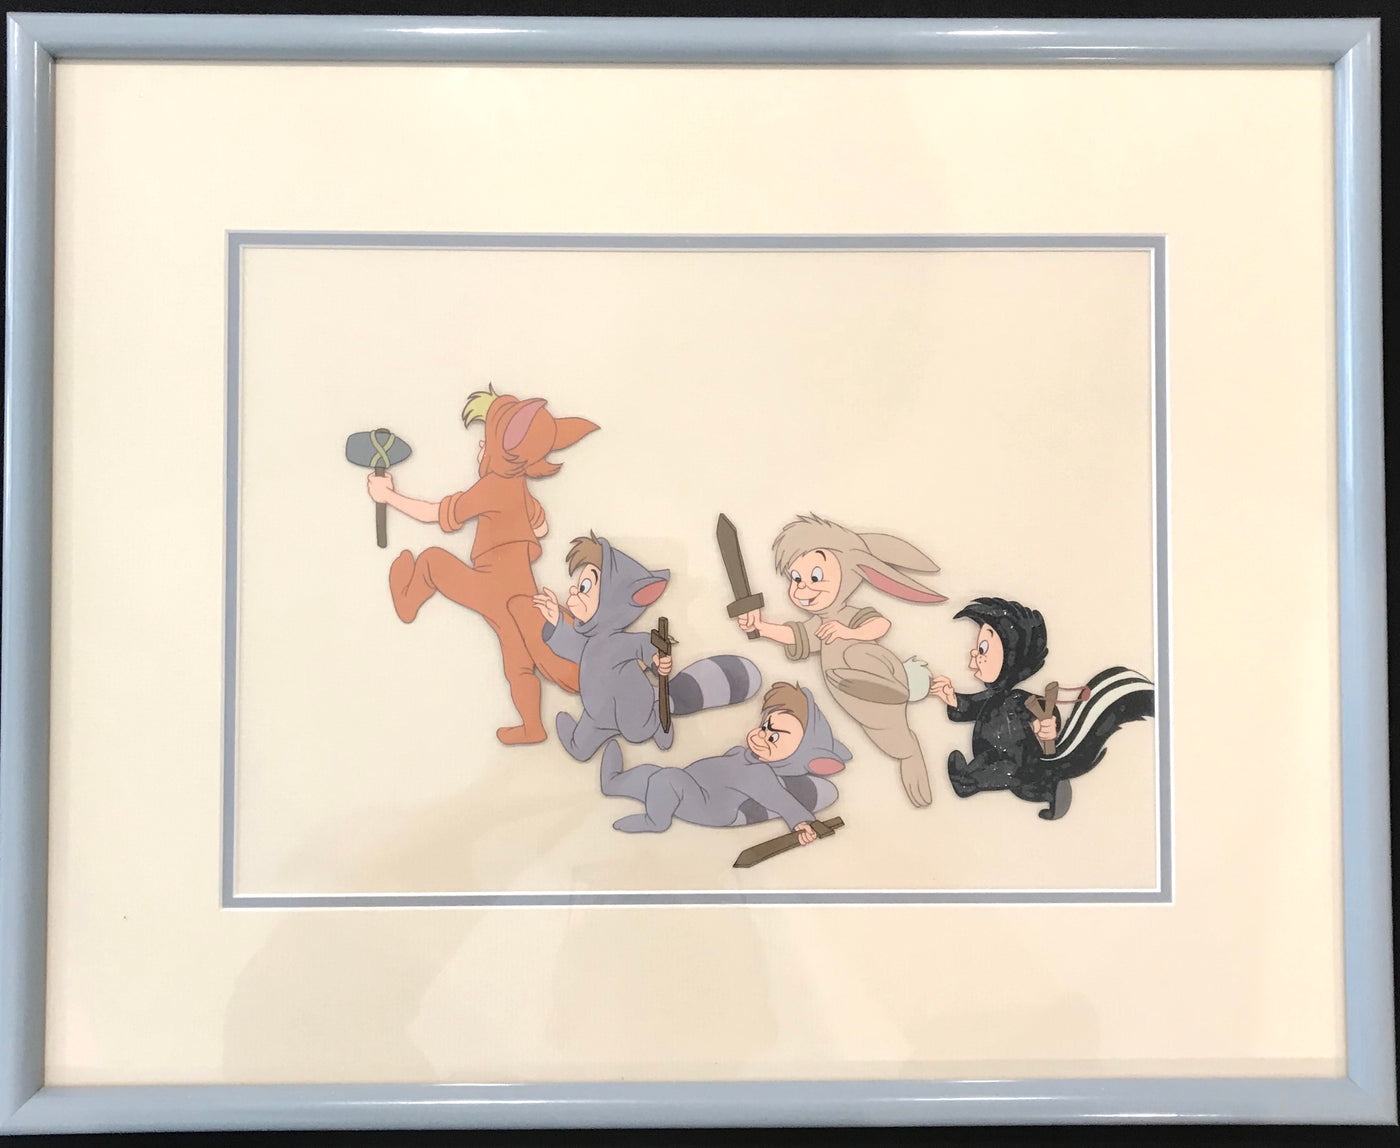 Original Walt Disney Production Cel from Peter Pan featuring the Lost Boys